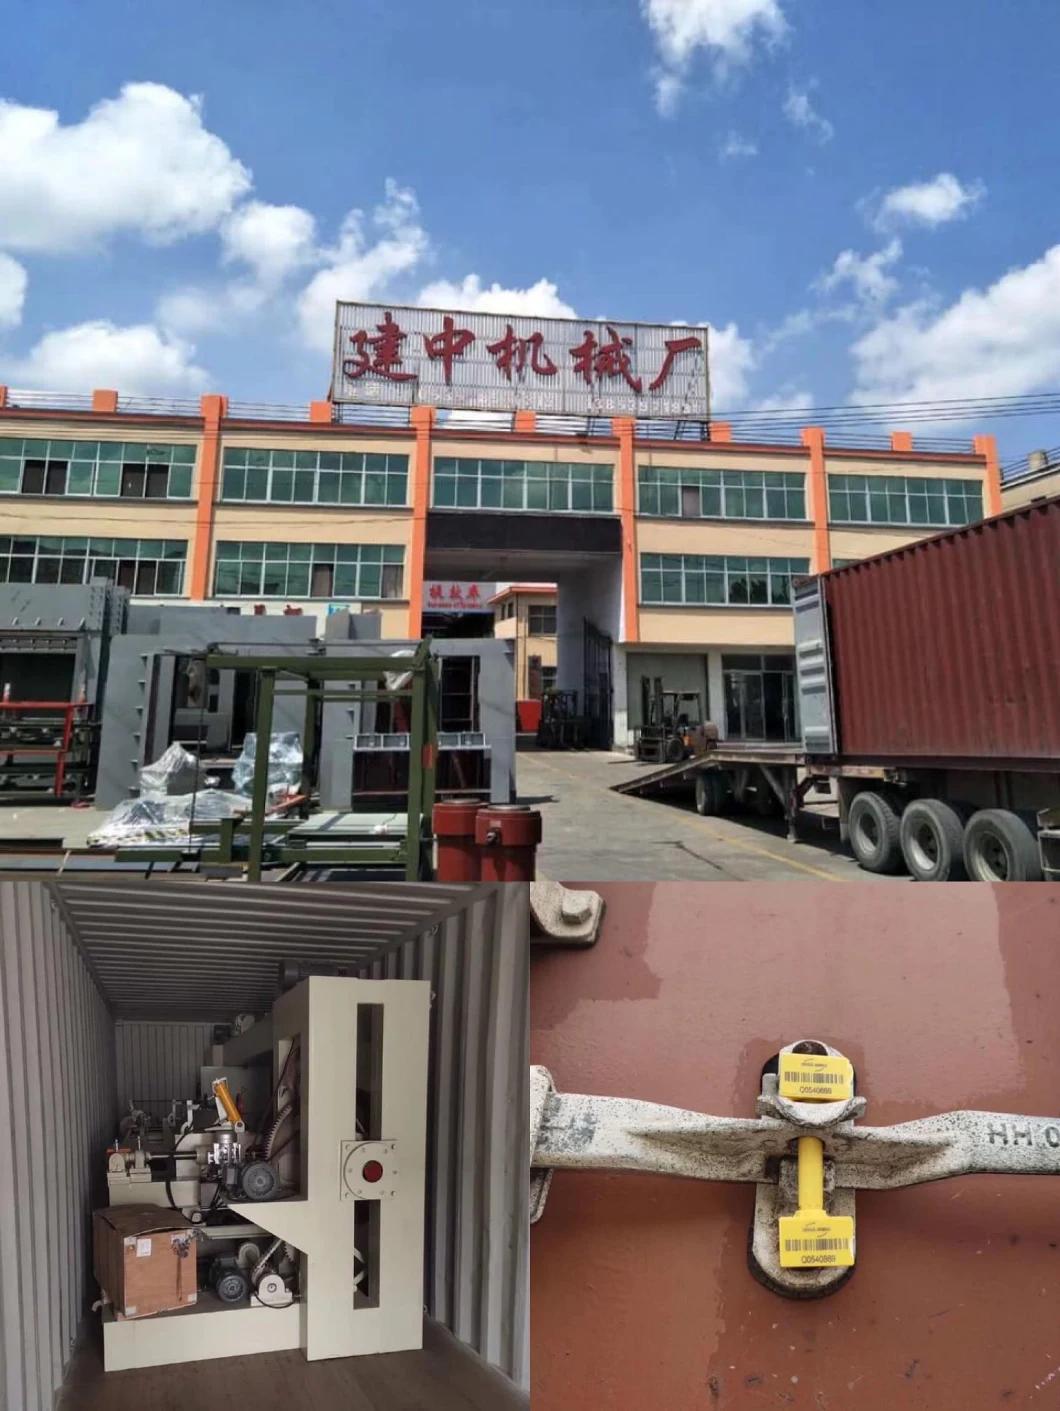 Plywood Paving Machine/ Various Kinds Machine/Easy Use/Board Paving/Reasonable Quality Machinery/Paving Equipment